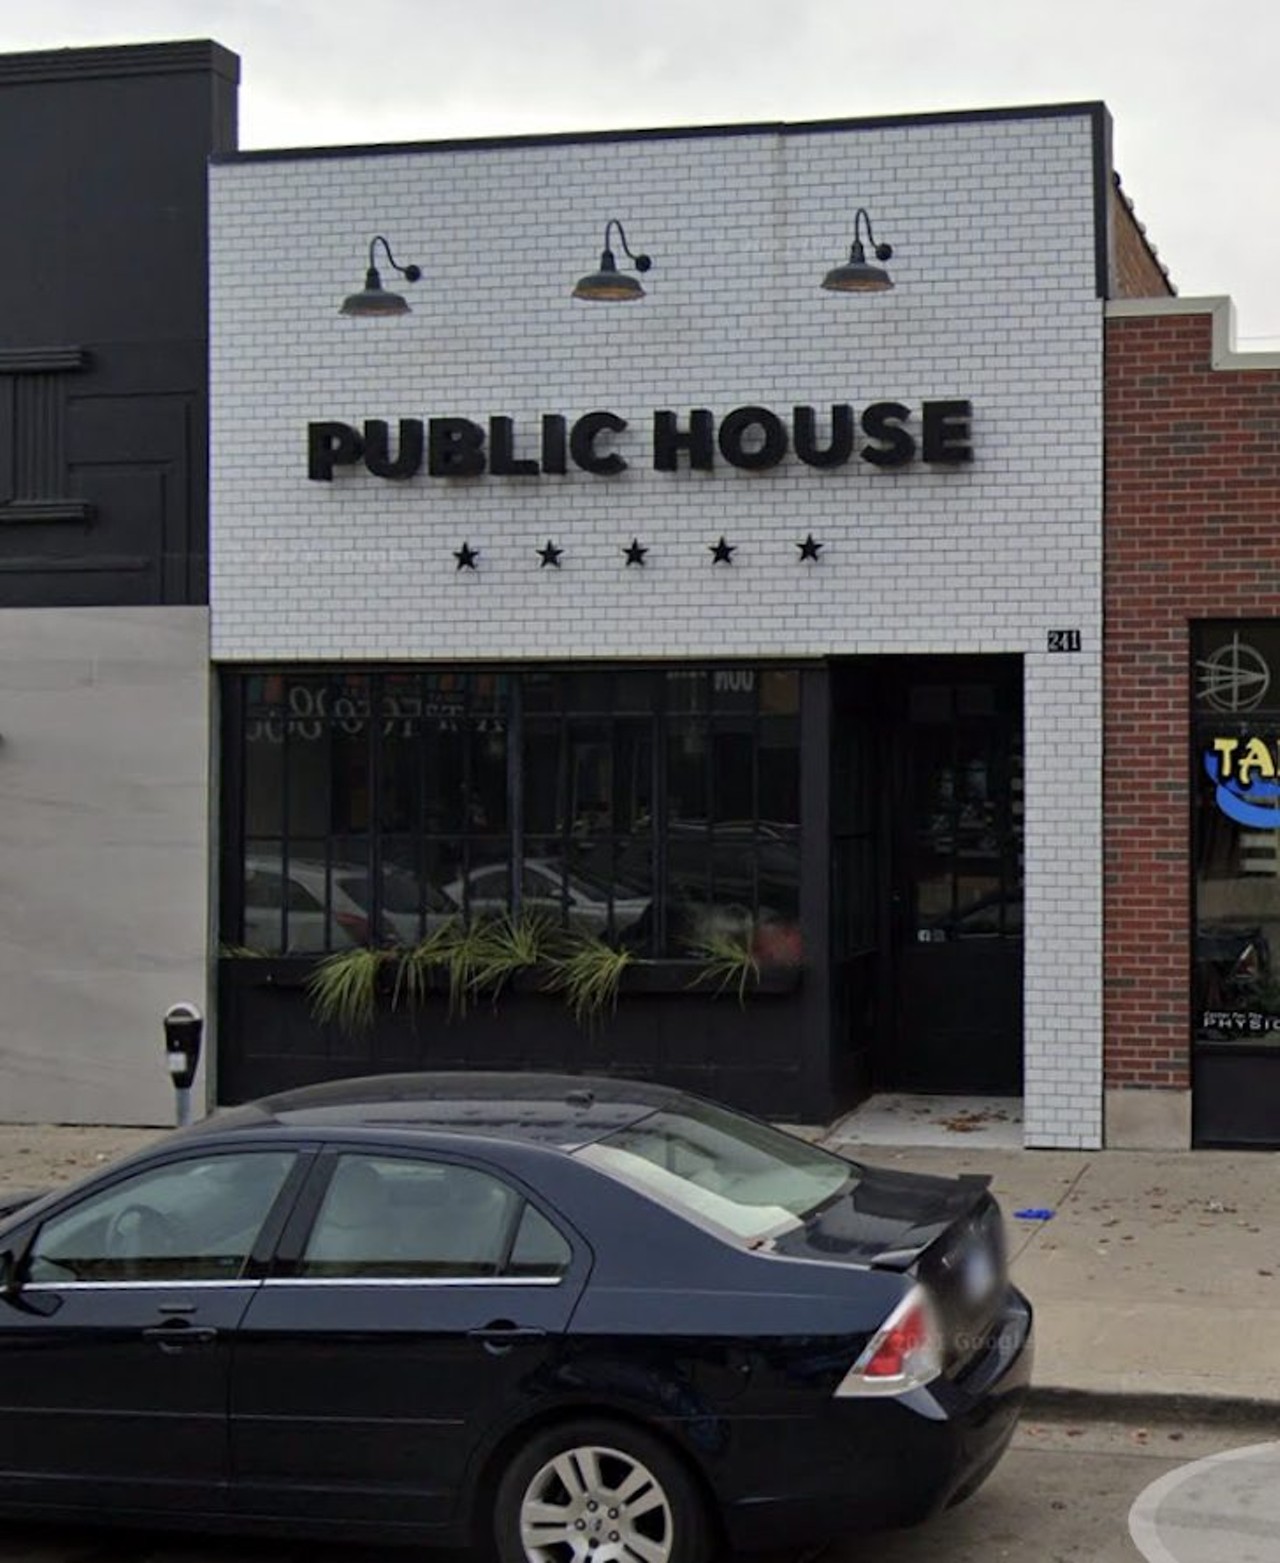 Public House
241 W. Nine Mile Rd., Ferndale
Claims of a toxic work environment temporarily shuttered the Ferndale establishment Public House. Earlier this year, the restaurant was sold, along with Antihero, to a new ownership group. The re-opening of the 
restaurant under its new management has yet to be determined.
Photo via Google Maps